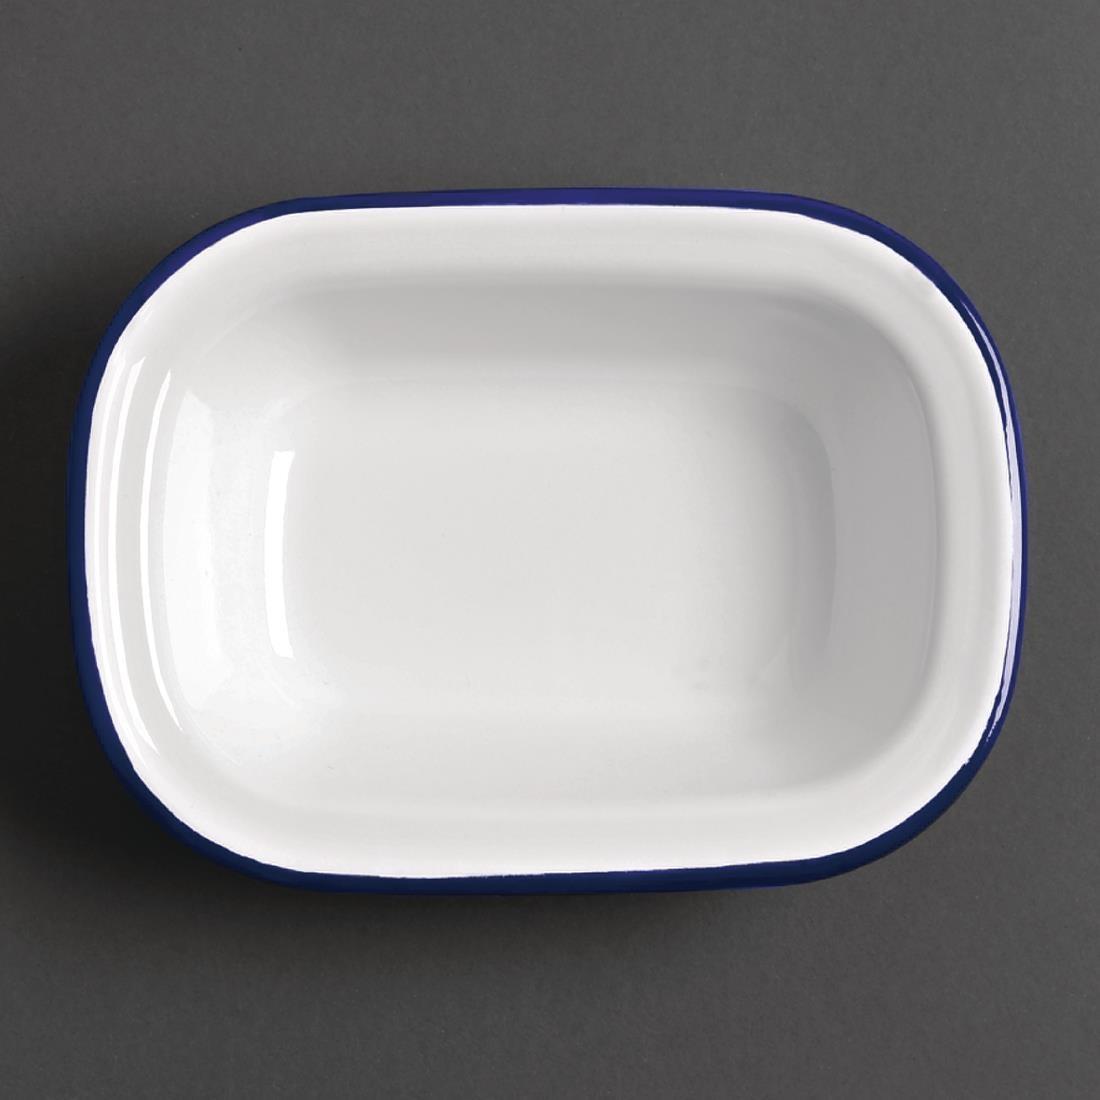 Olympia Enamel Pie Dishes Rectangular 180 x 135mm (Pack of 6) - GM511  - 2